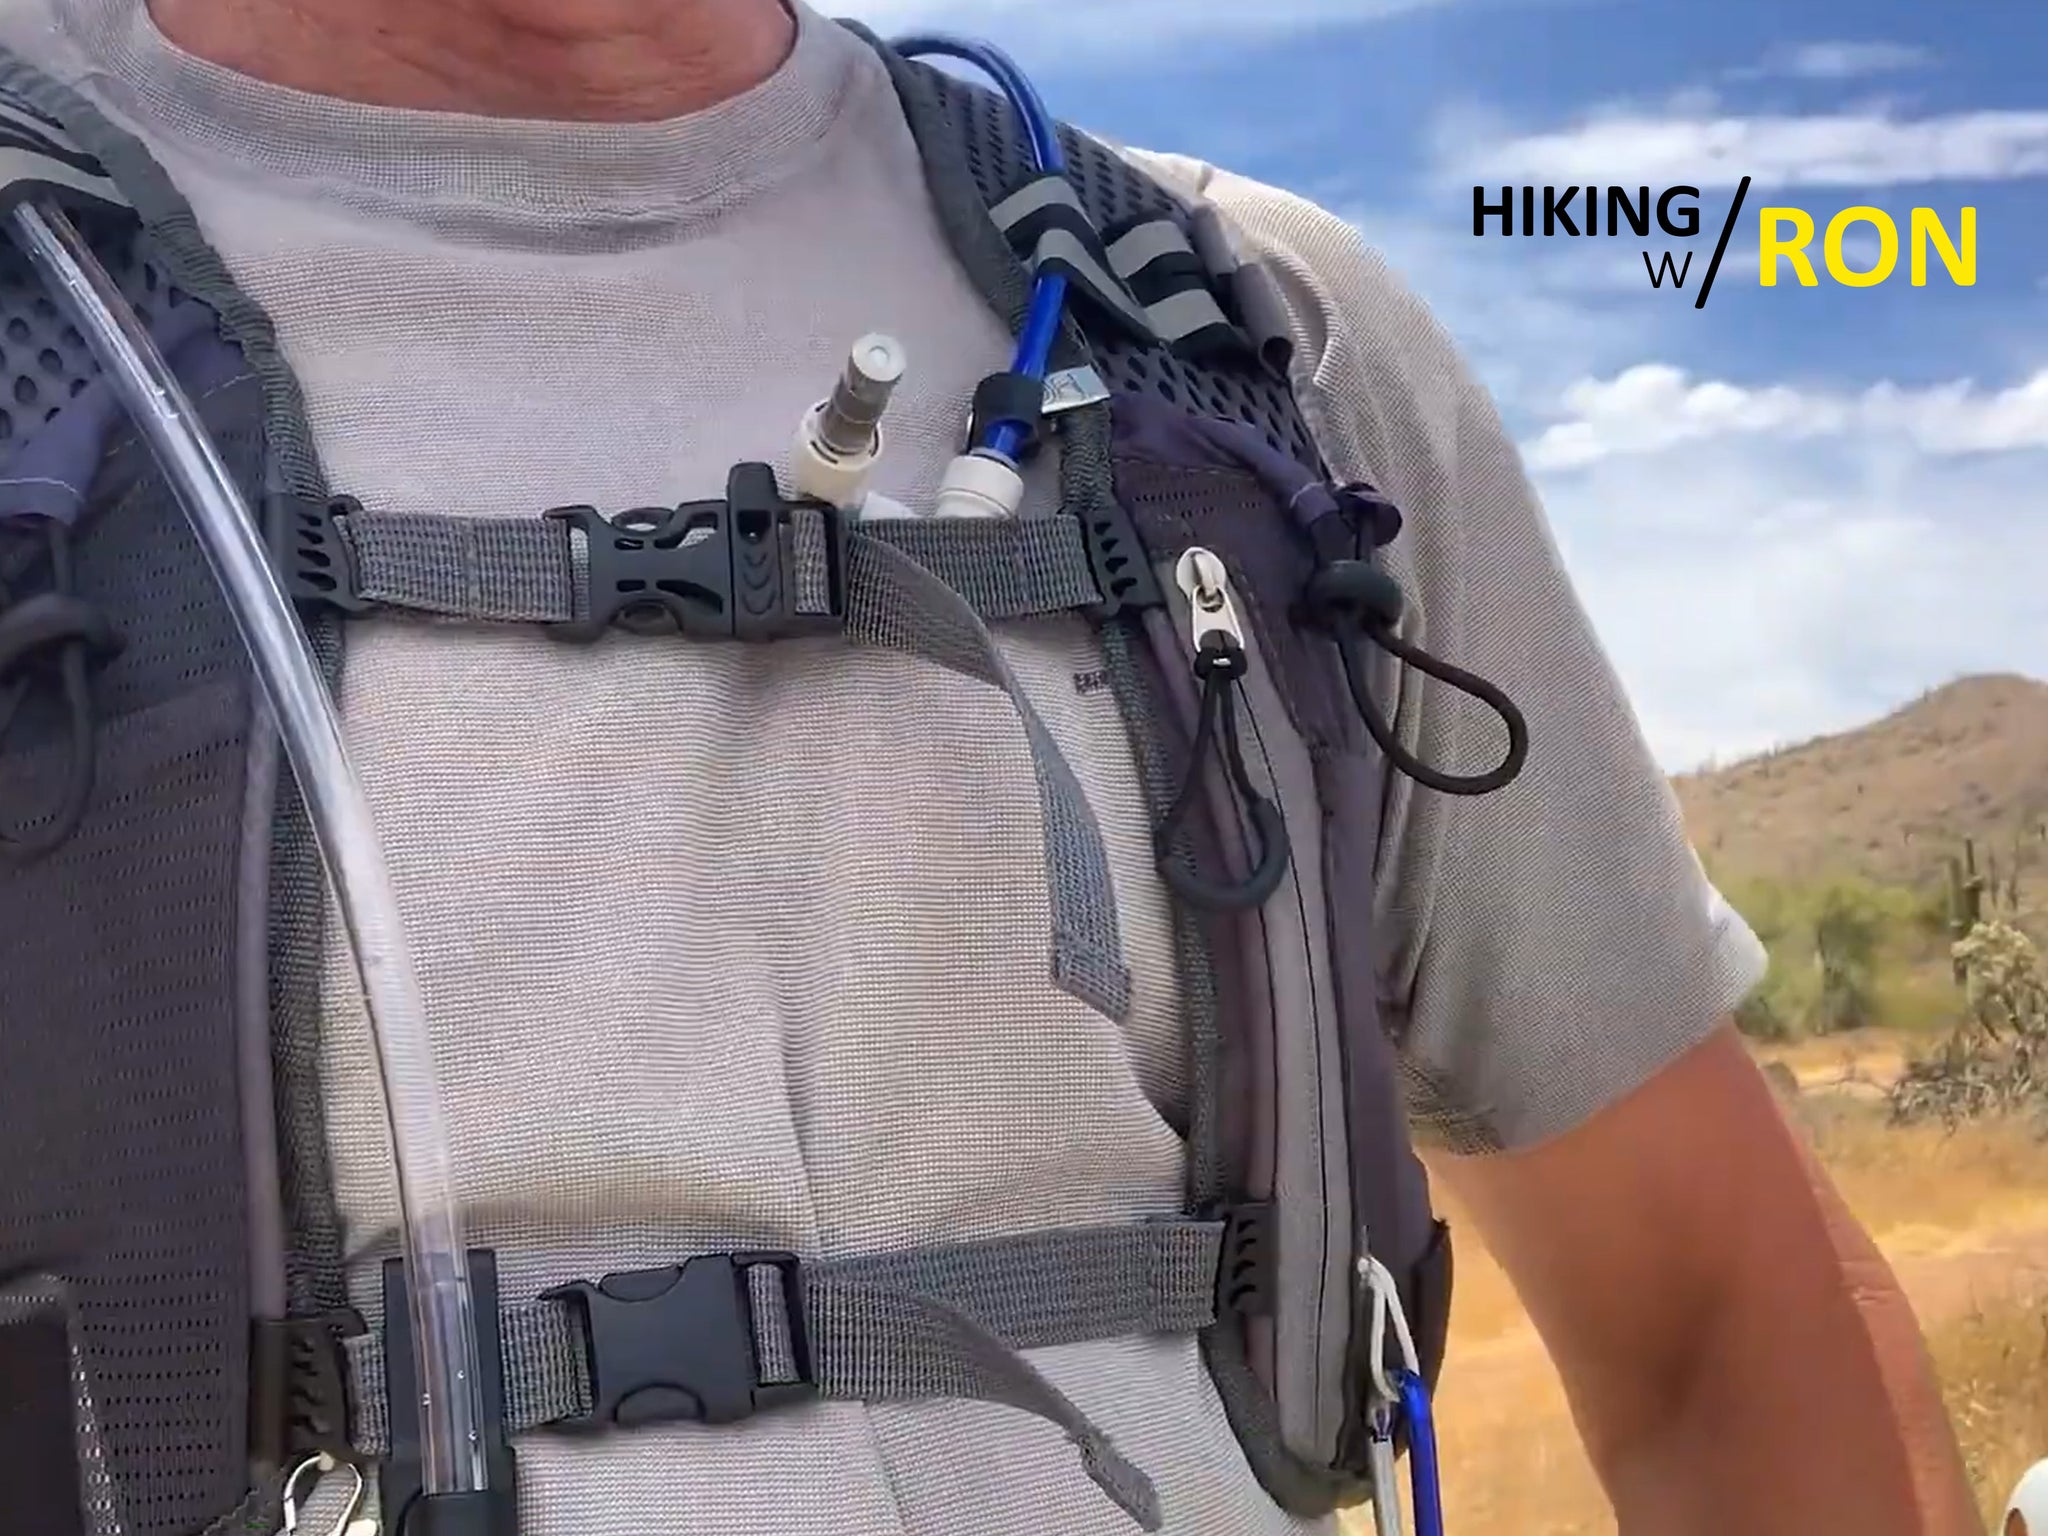 Hiking w/ Ron: PCS Pack features